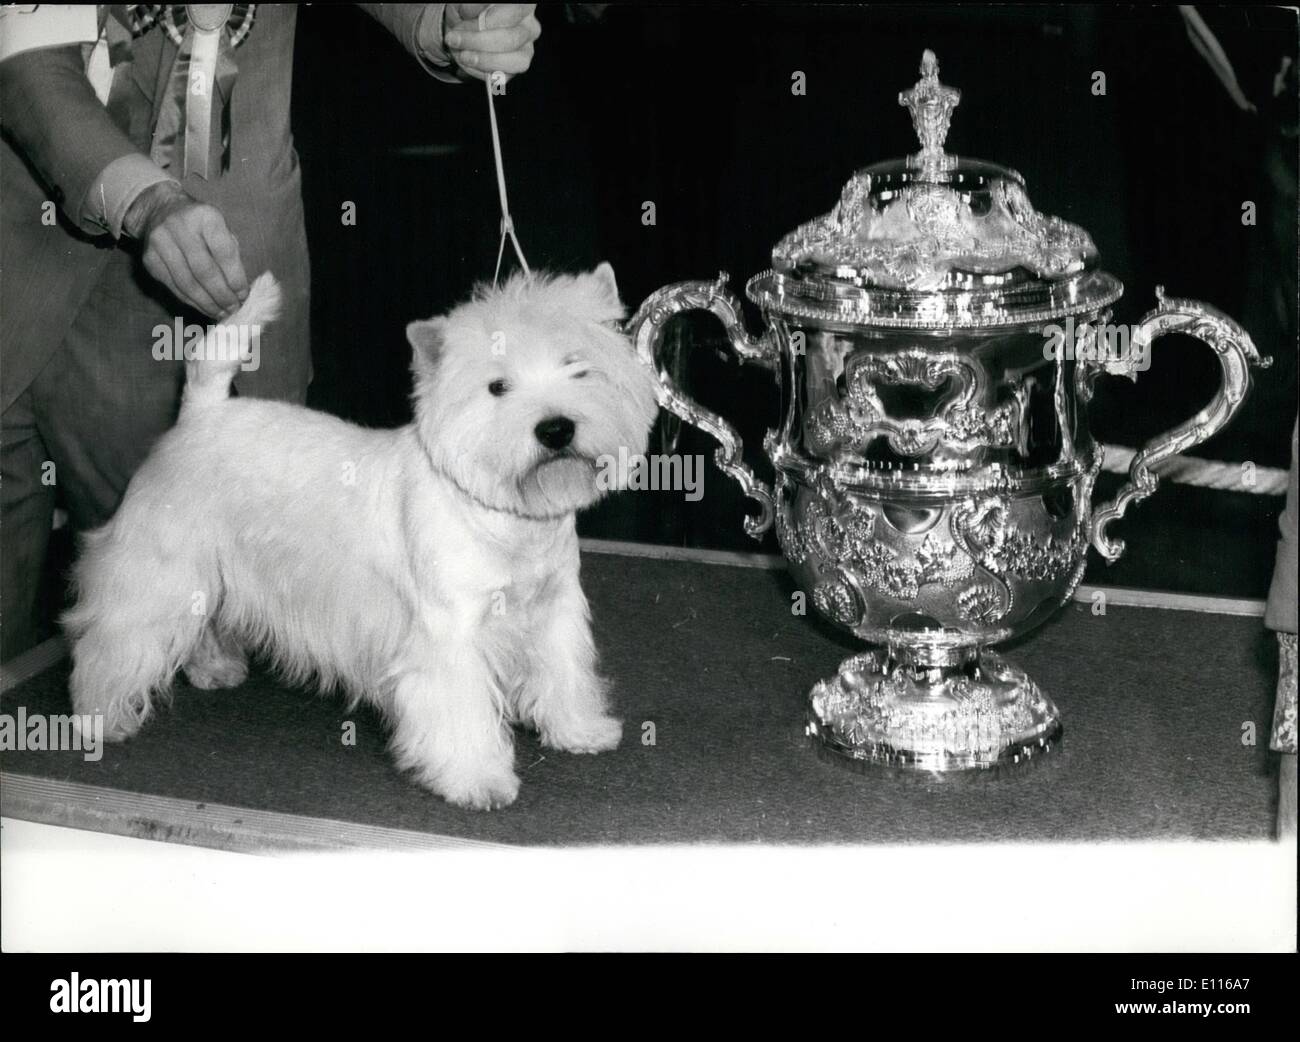 Feb. 02, 1976 - A est Highland Terrier Wins Crufts - A West Highland Terrier by the Name of Bertie Buttons Yesterday Became the Stock Photo